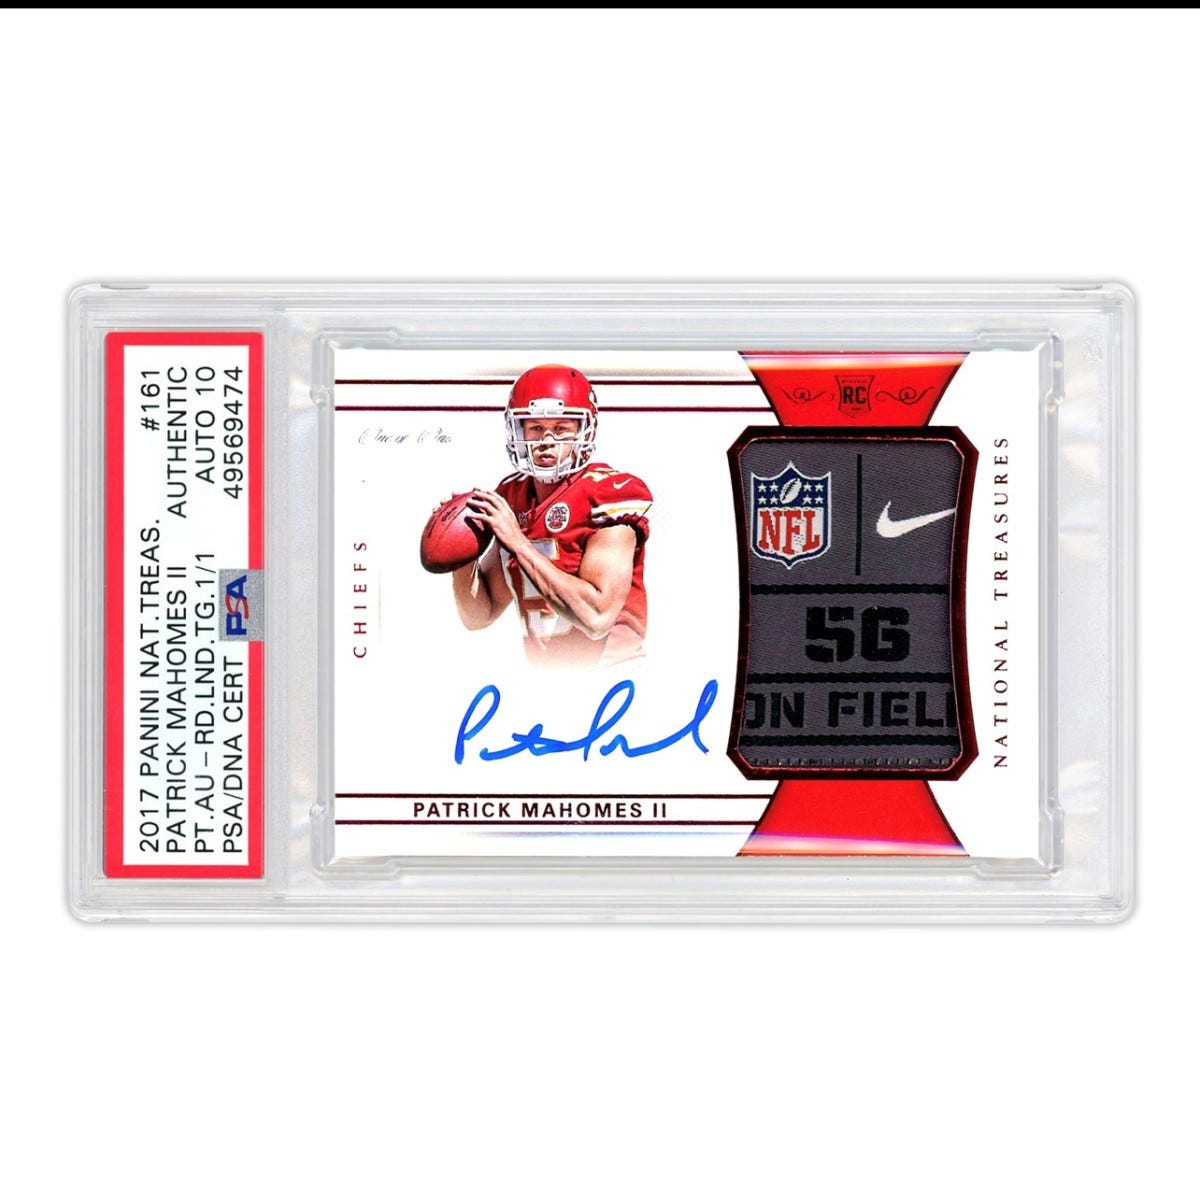 A 2017 National Treasures Patrick Mahomes 1/1 rookie card being offered to investors by Collectable